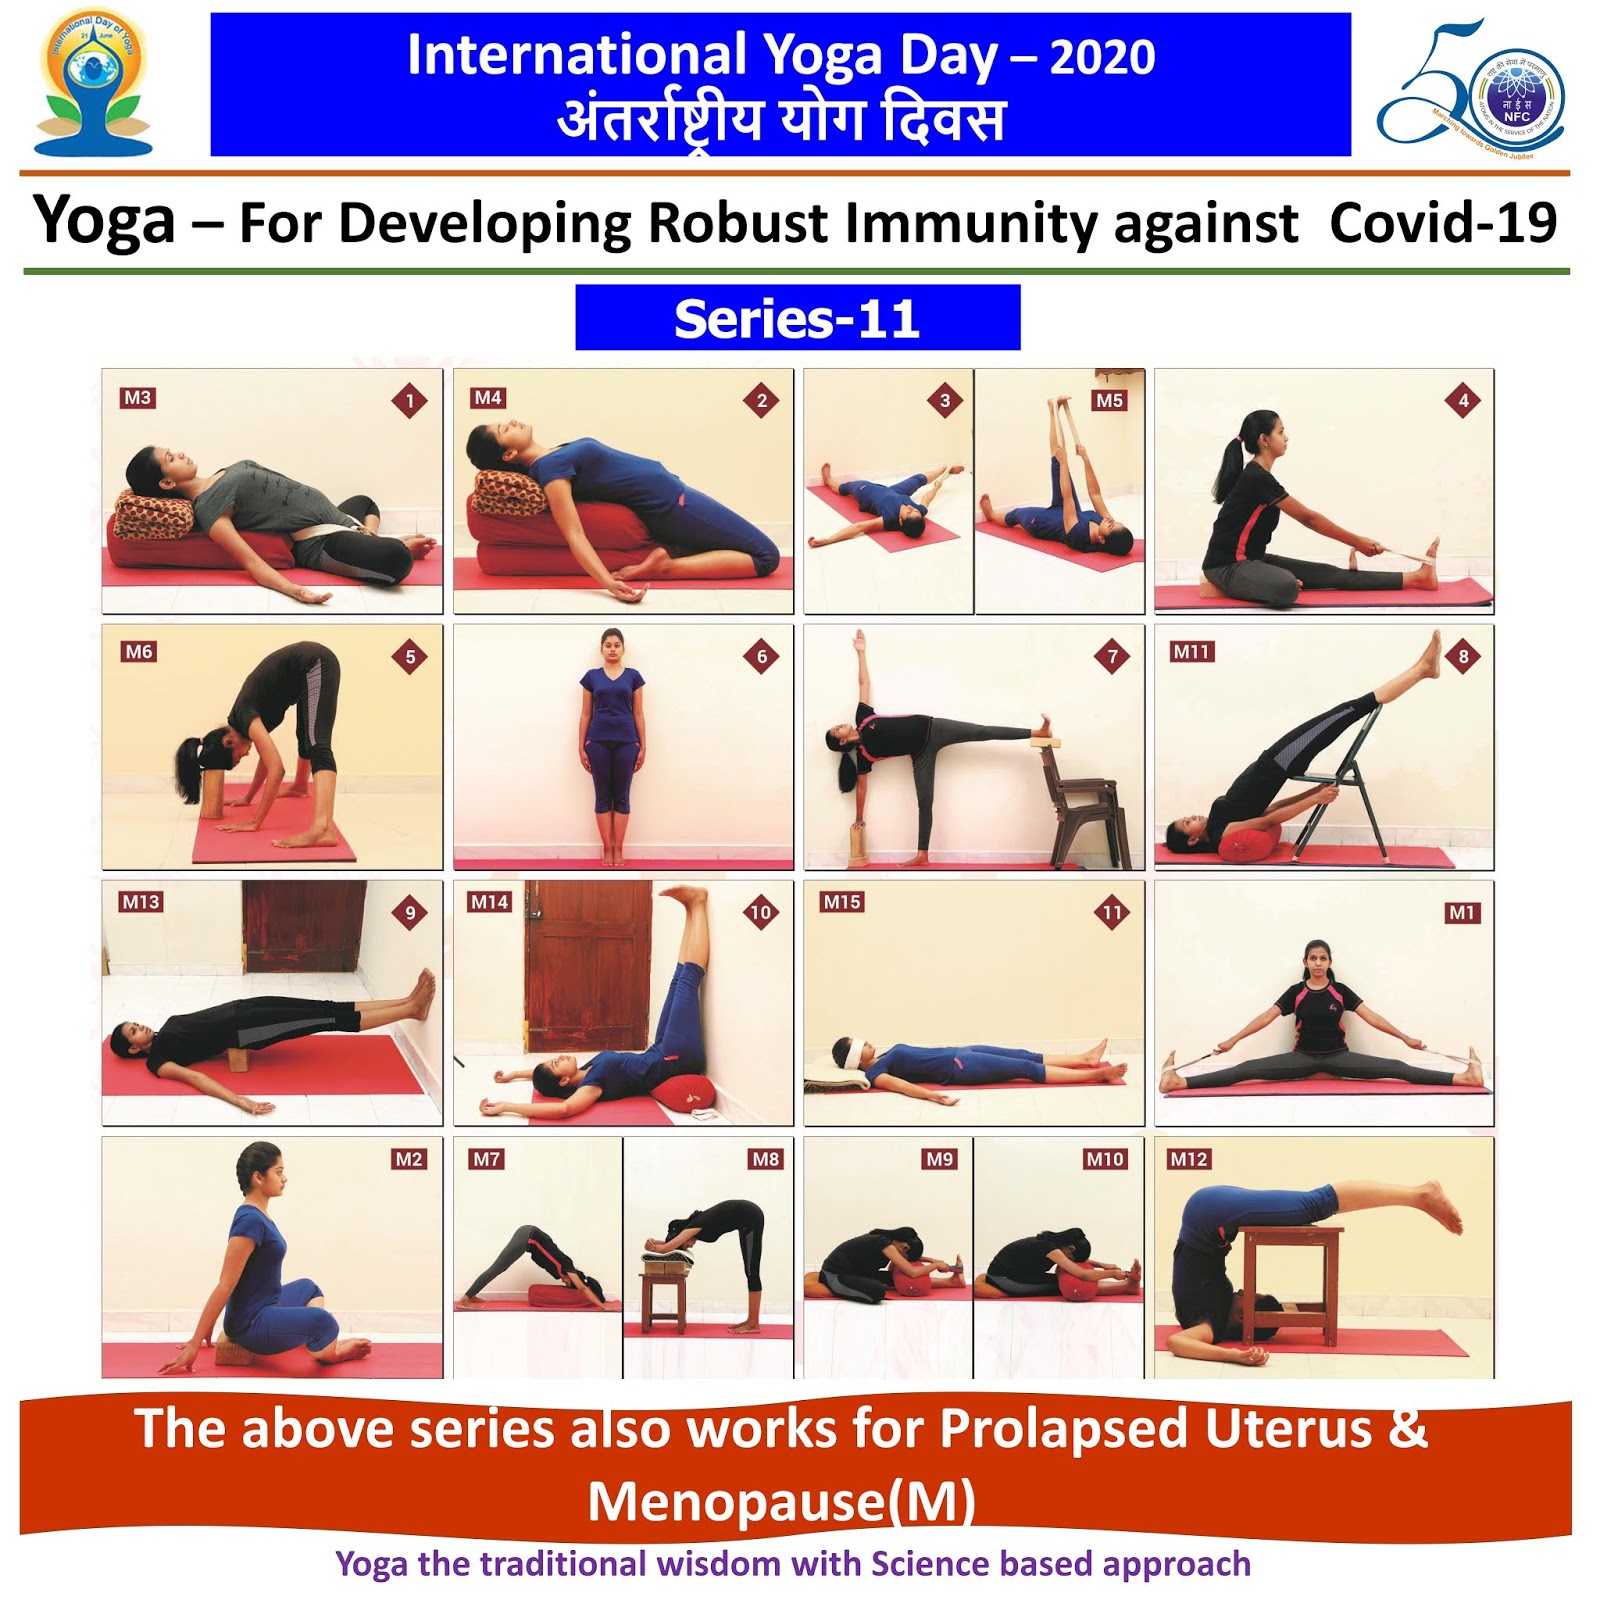 Happy International Yoga Day ... This series also works for Prolapsed Uterus & Menopause(M)